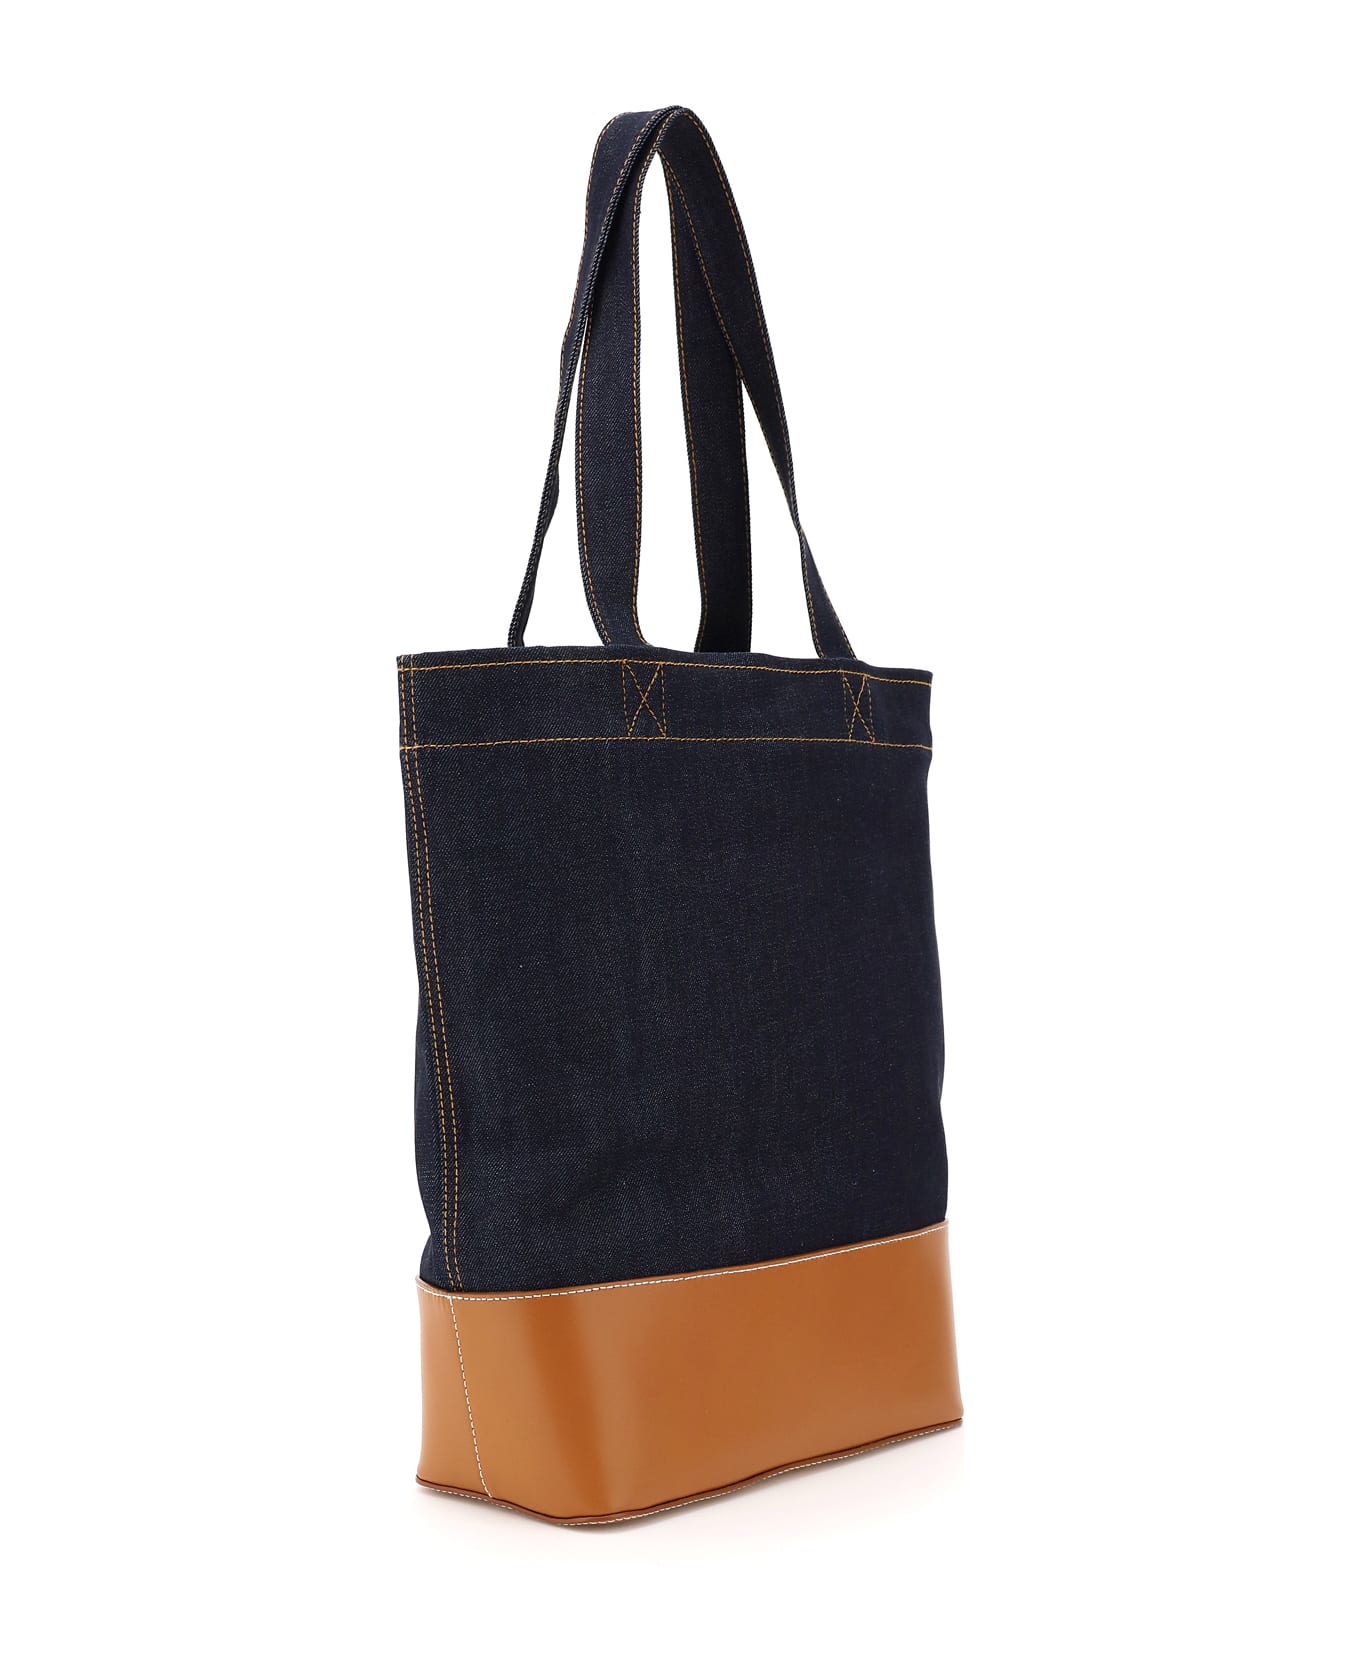 A.P.C. Axelle Tote Bag - Brown トートバッグ